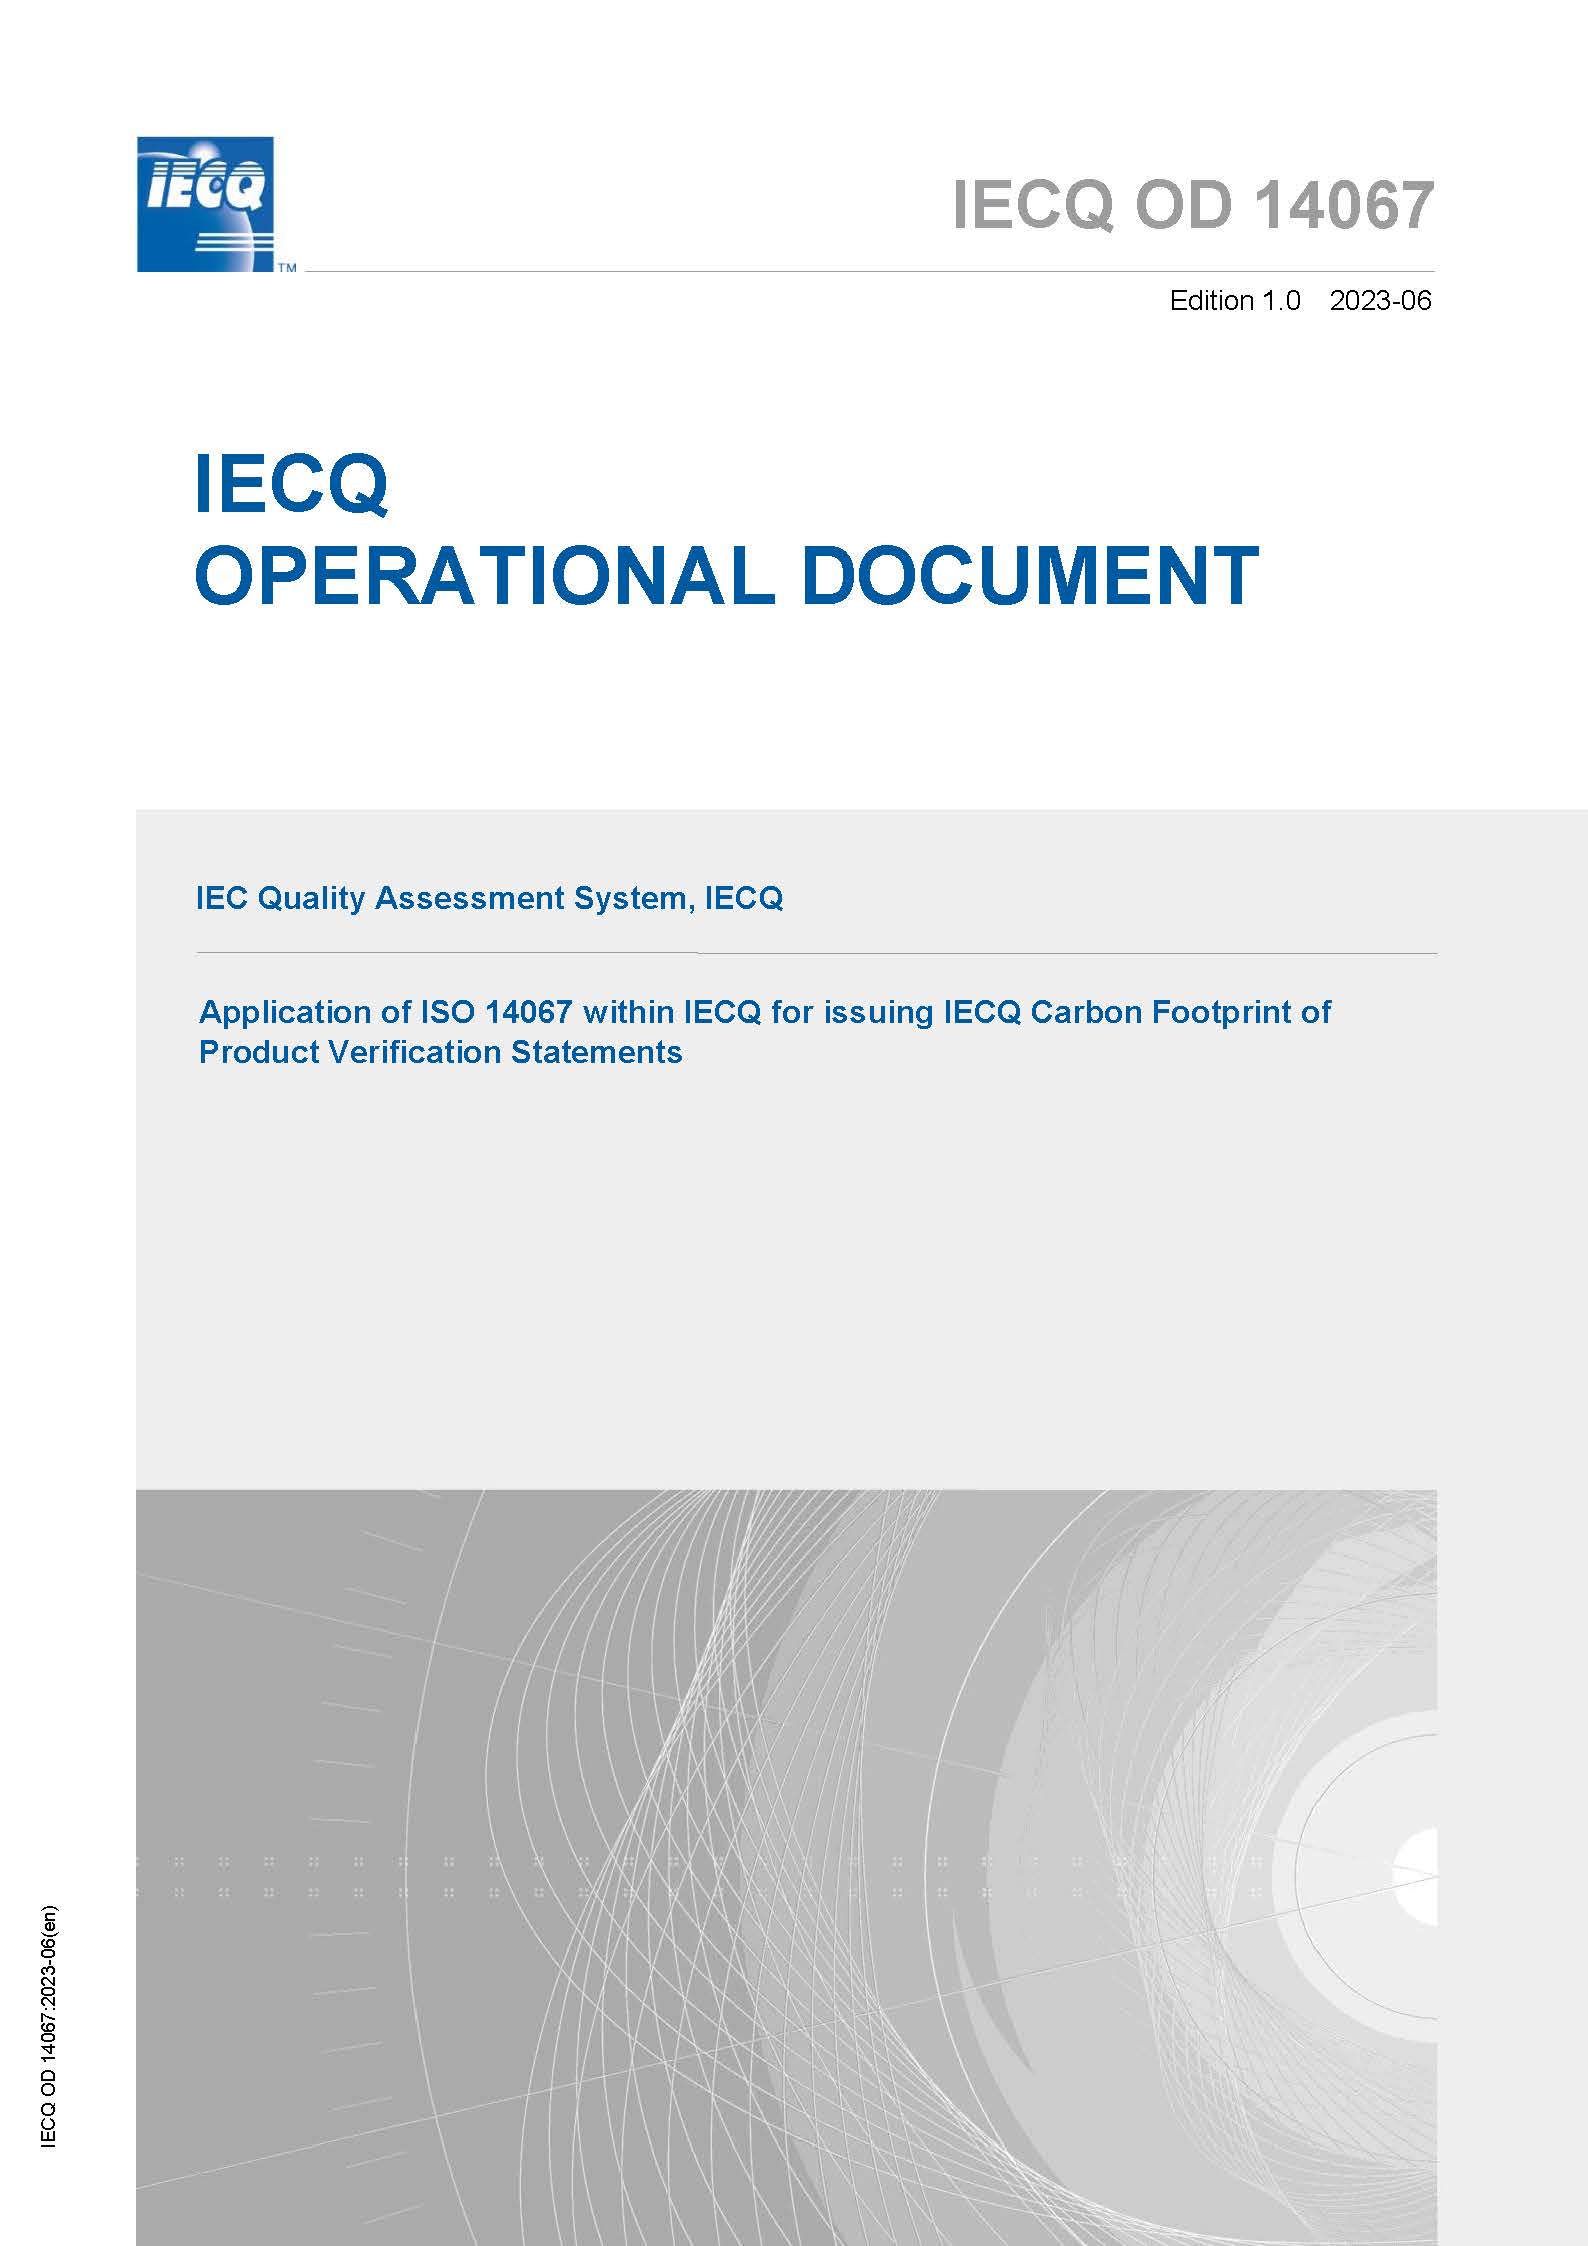 IECQ Rules of Procedure - Part 3-2: IECQ Approved Component Products, Related Materials & Assemblies Scheme. IECQ Approved Component - Automotive Qualification Programme (IECQ AC-AQP)